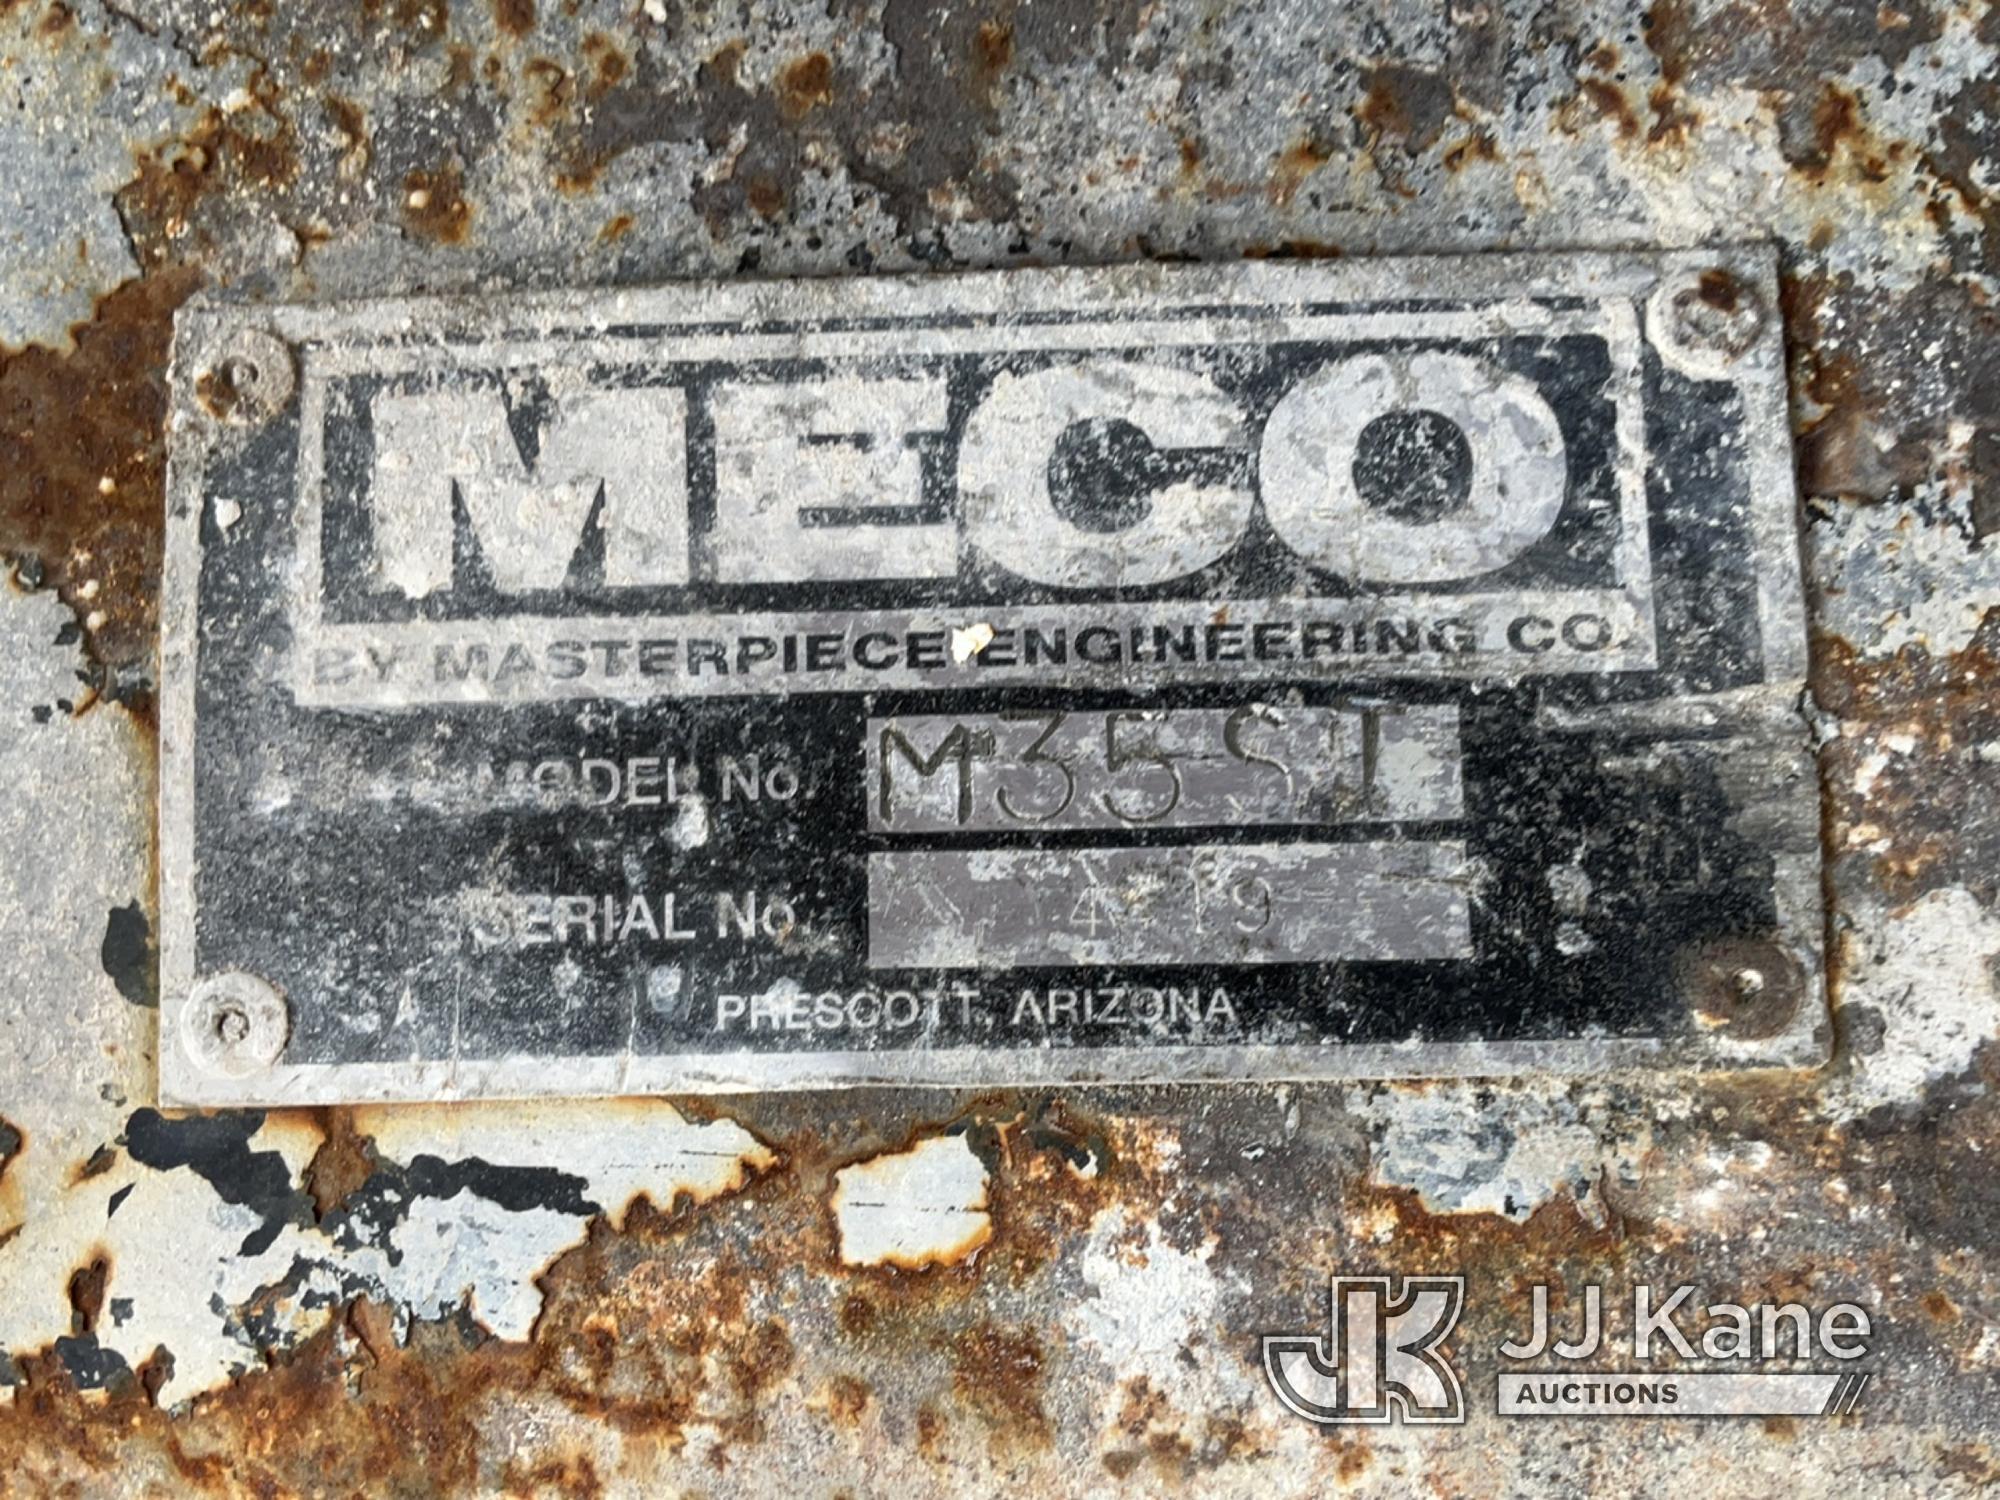 (South Beloit, IL) Meco 35 Condition Unknown) (Seller States-Operates